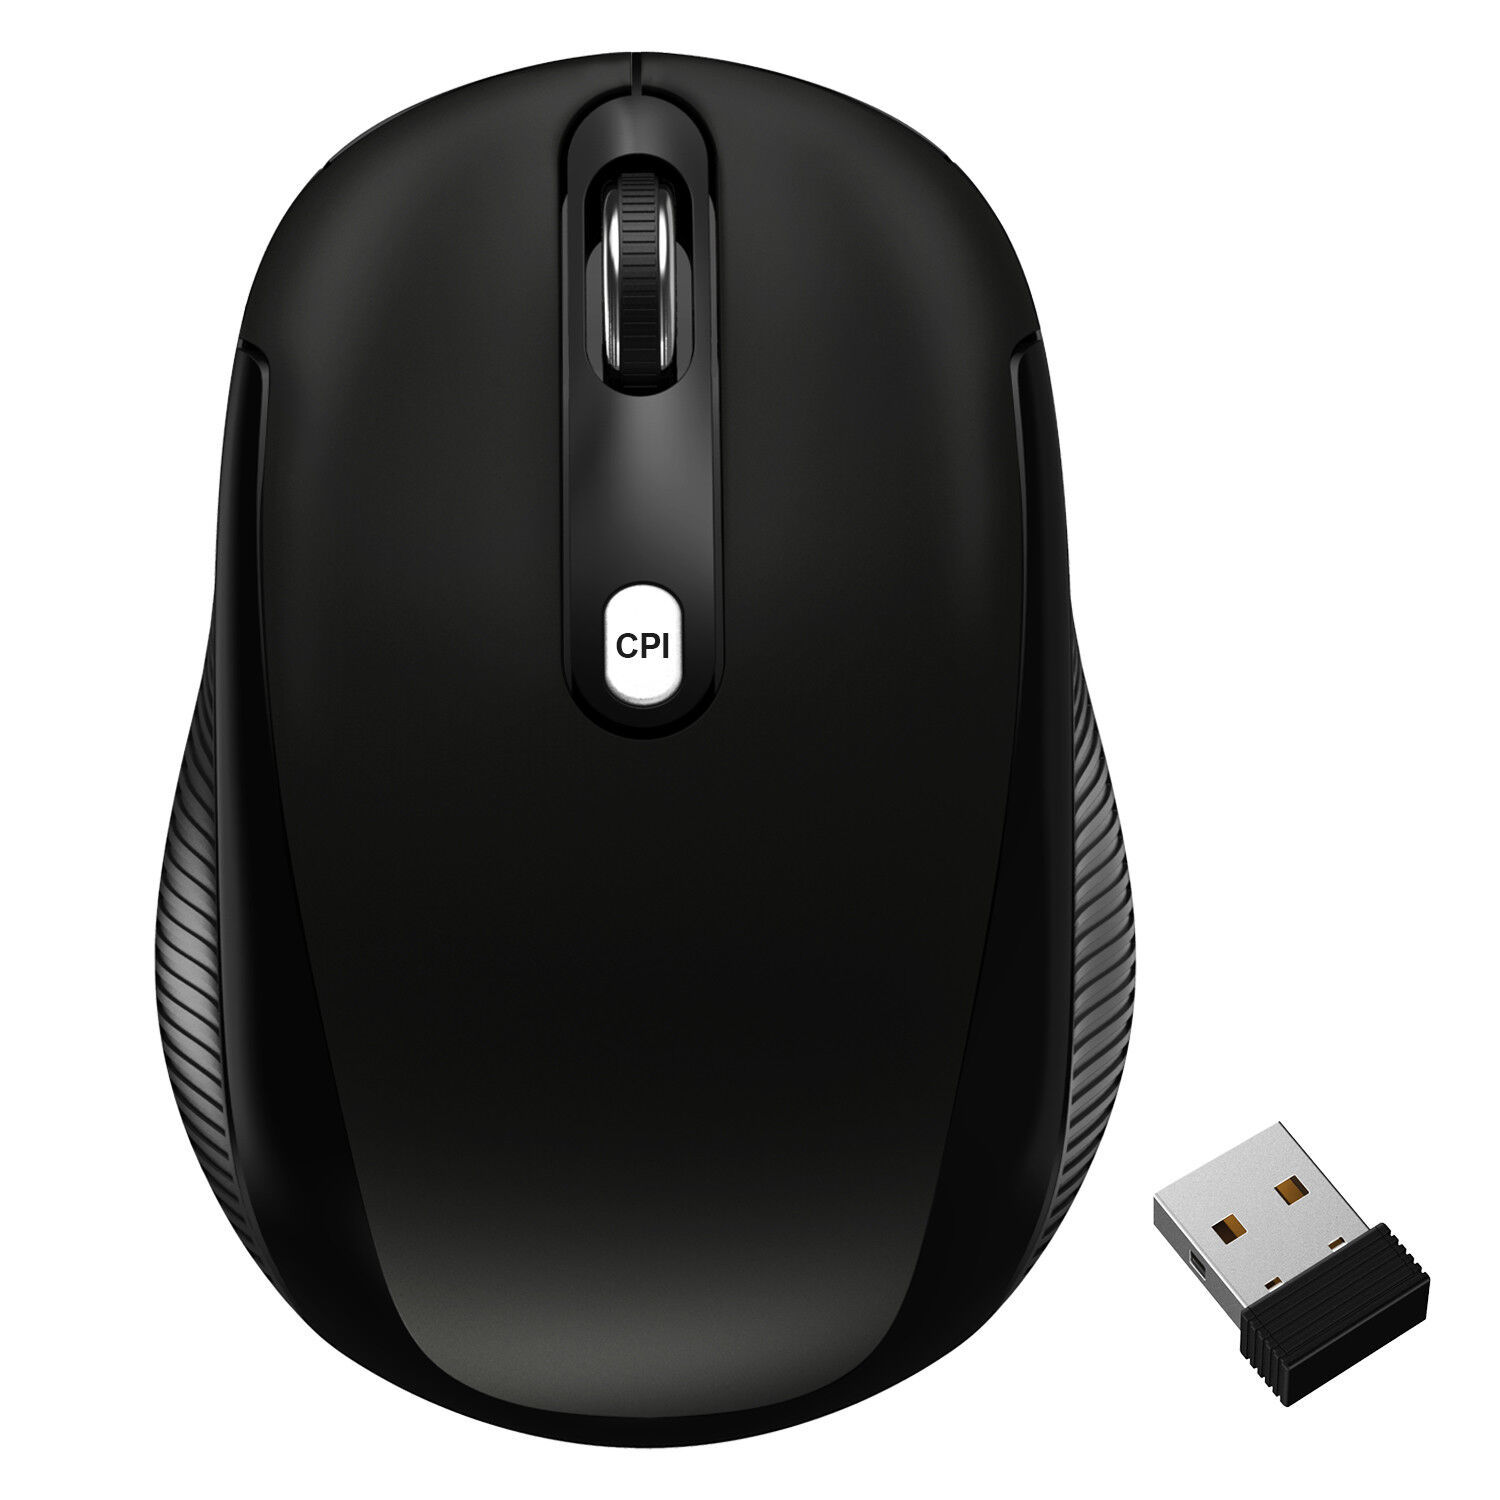 JETech 2.4Ghz Wireless Mobile Optical Mouse with 2 CPI Levels and USB Receiver - $23.99